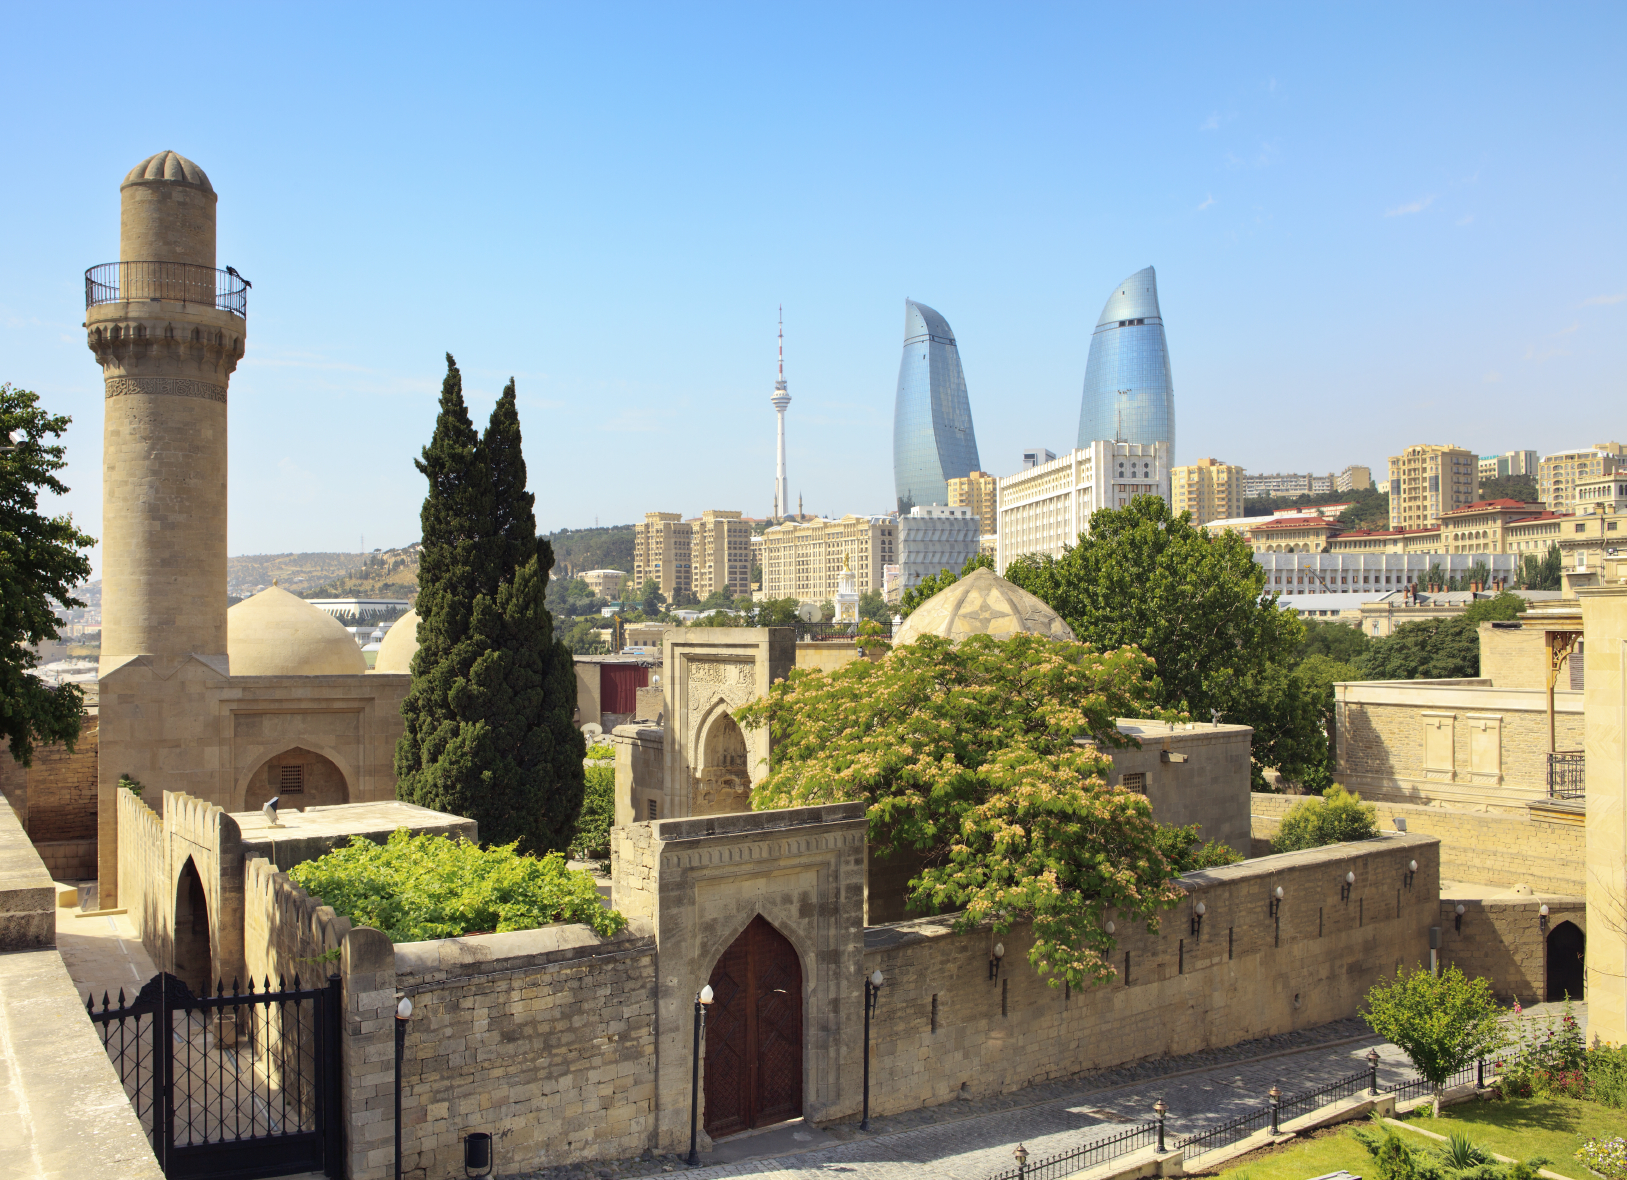 Shirvan shakir's Palace located in the Inner City of Baku, Azerbaijan, It was built in 14-15th century. The Inner City of Baku is in the list UNESCO World Heritage Site.